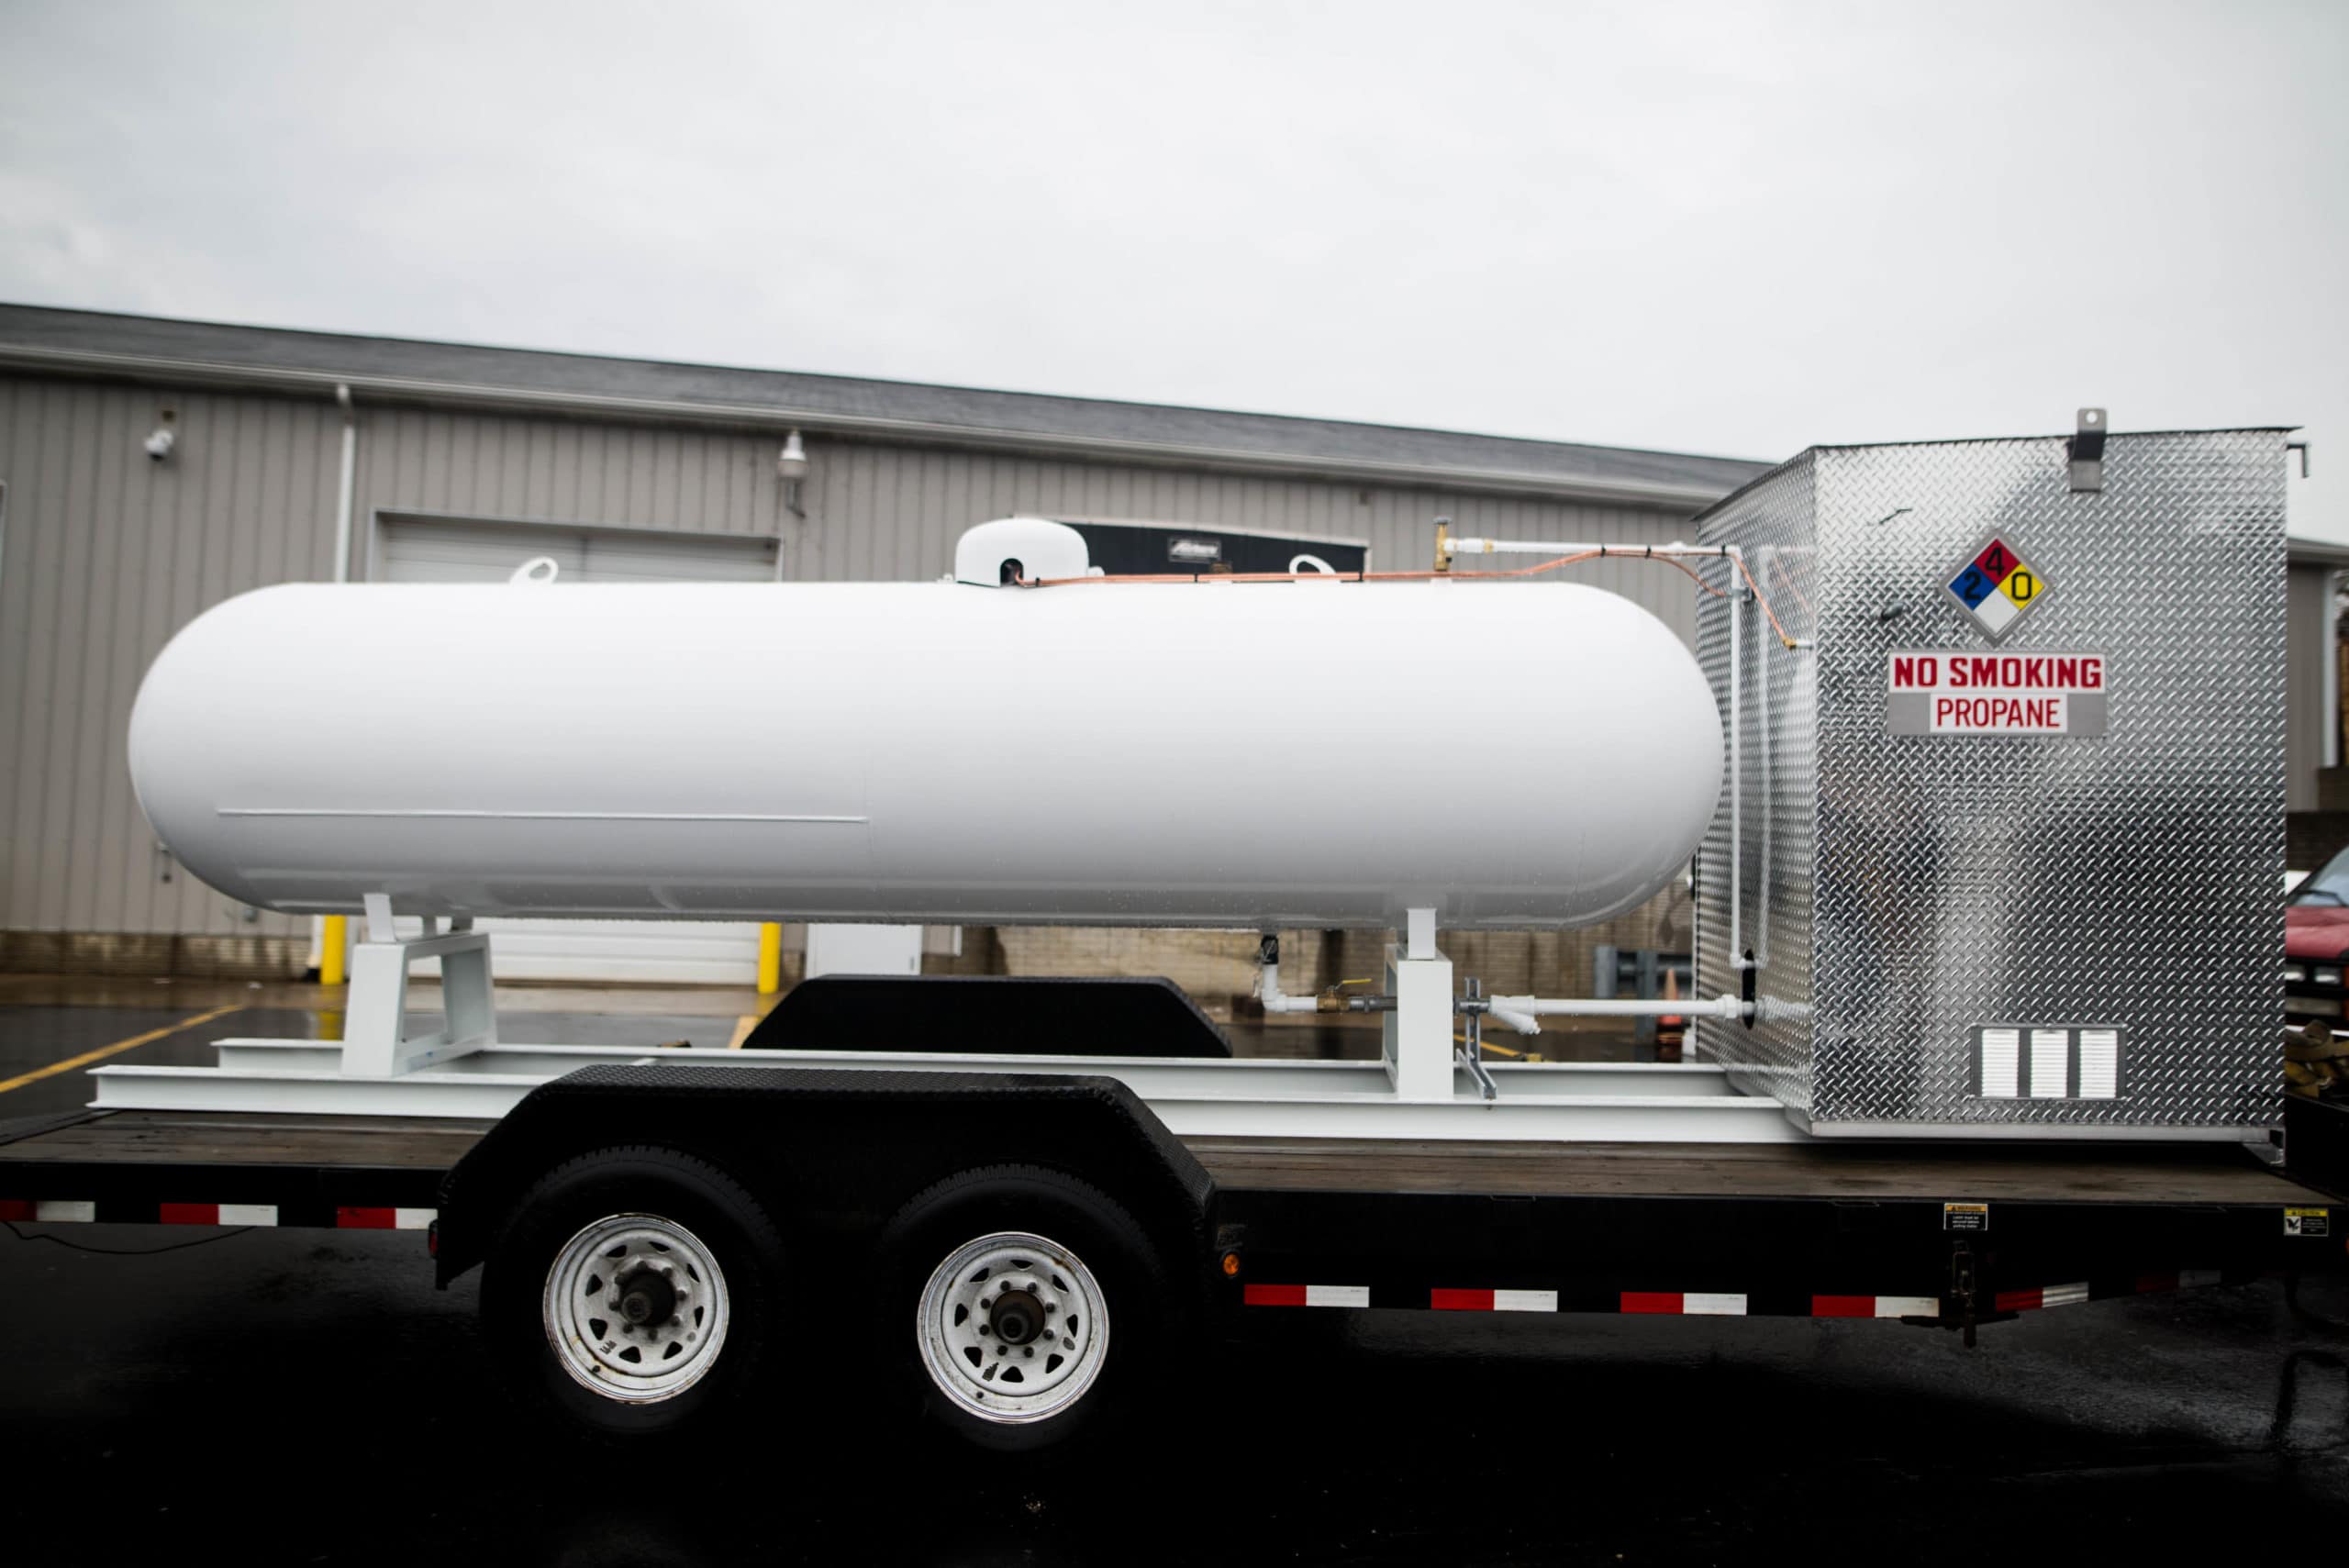 image of propane tank on a truck trailer